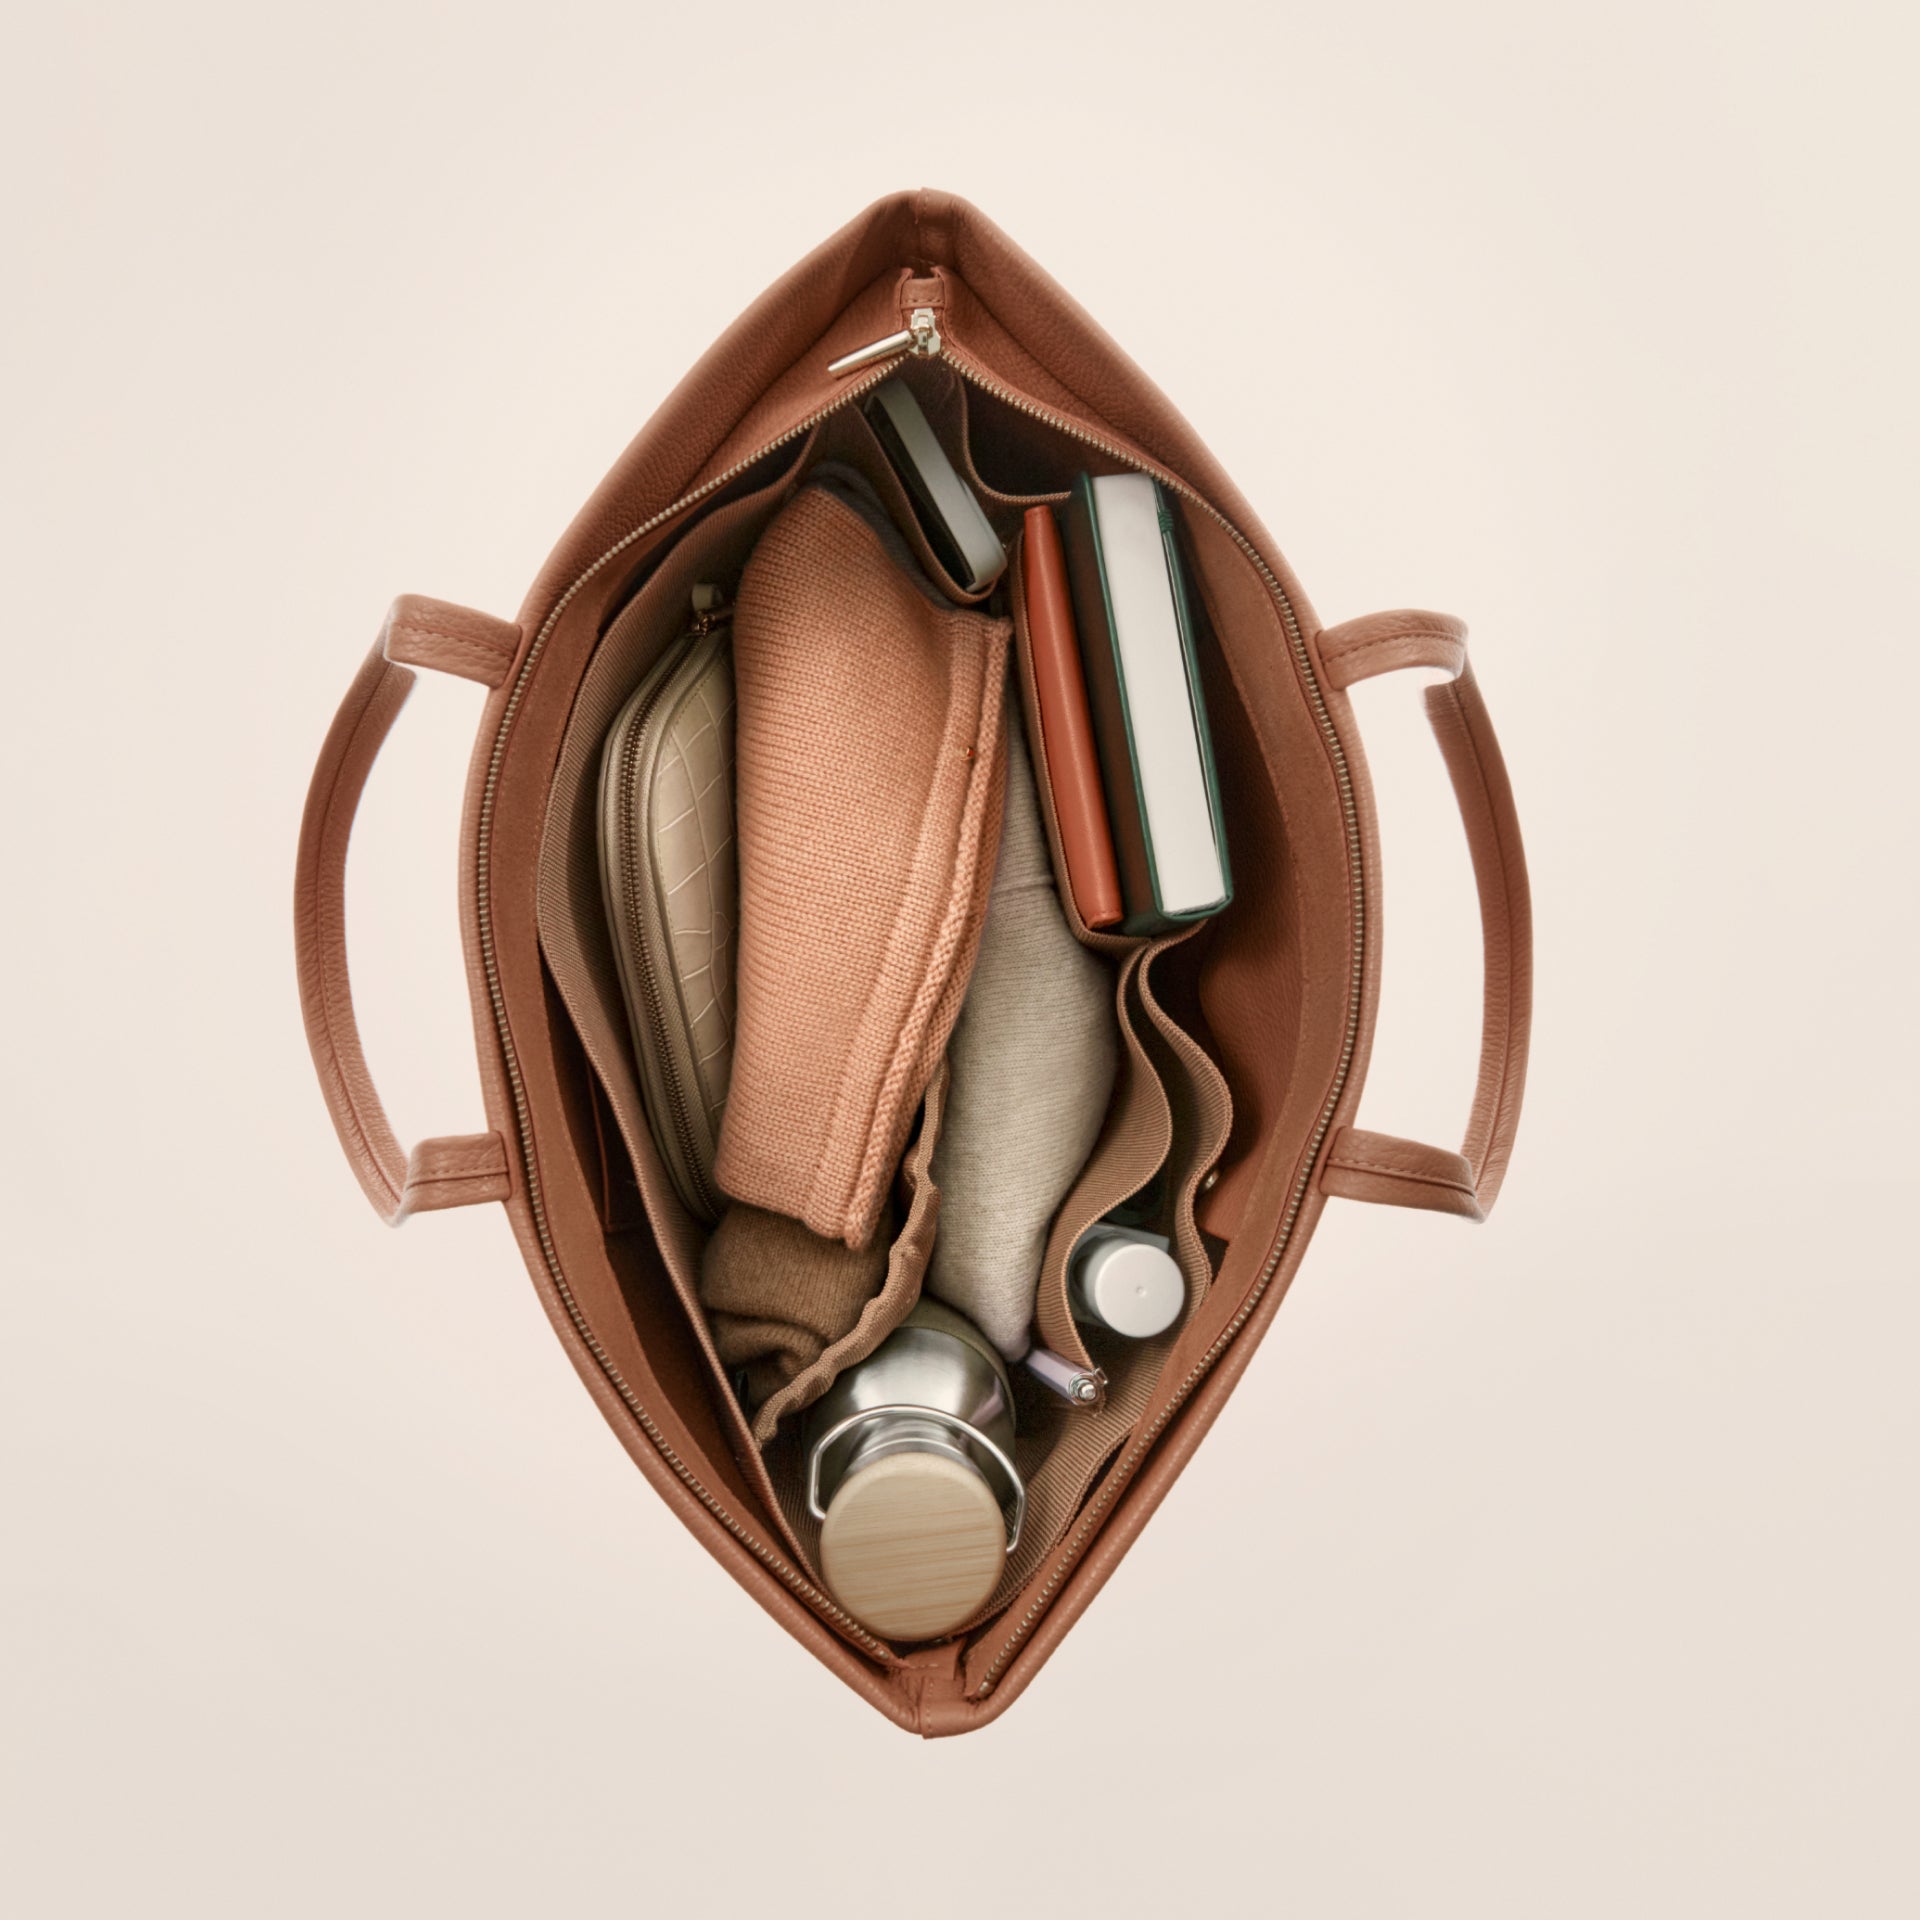 Overhead view of an open handbag with various items inside.